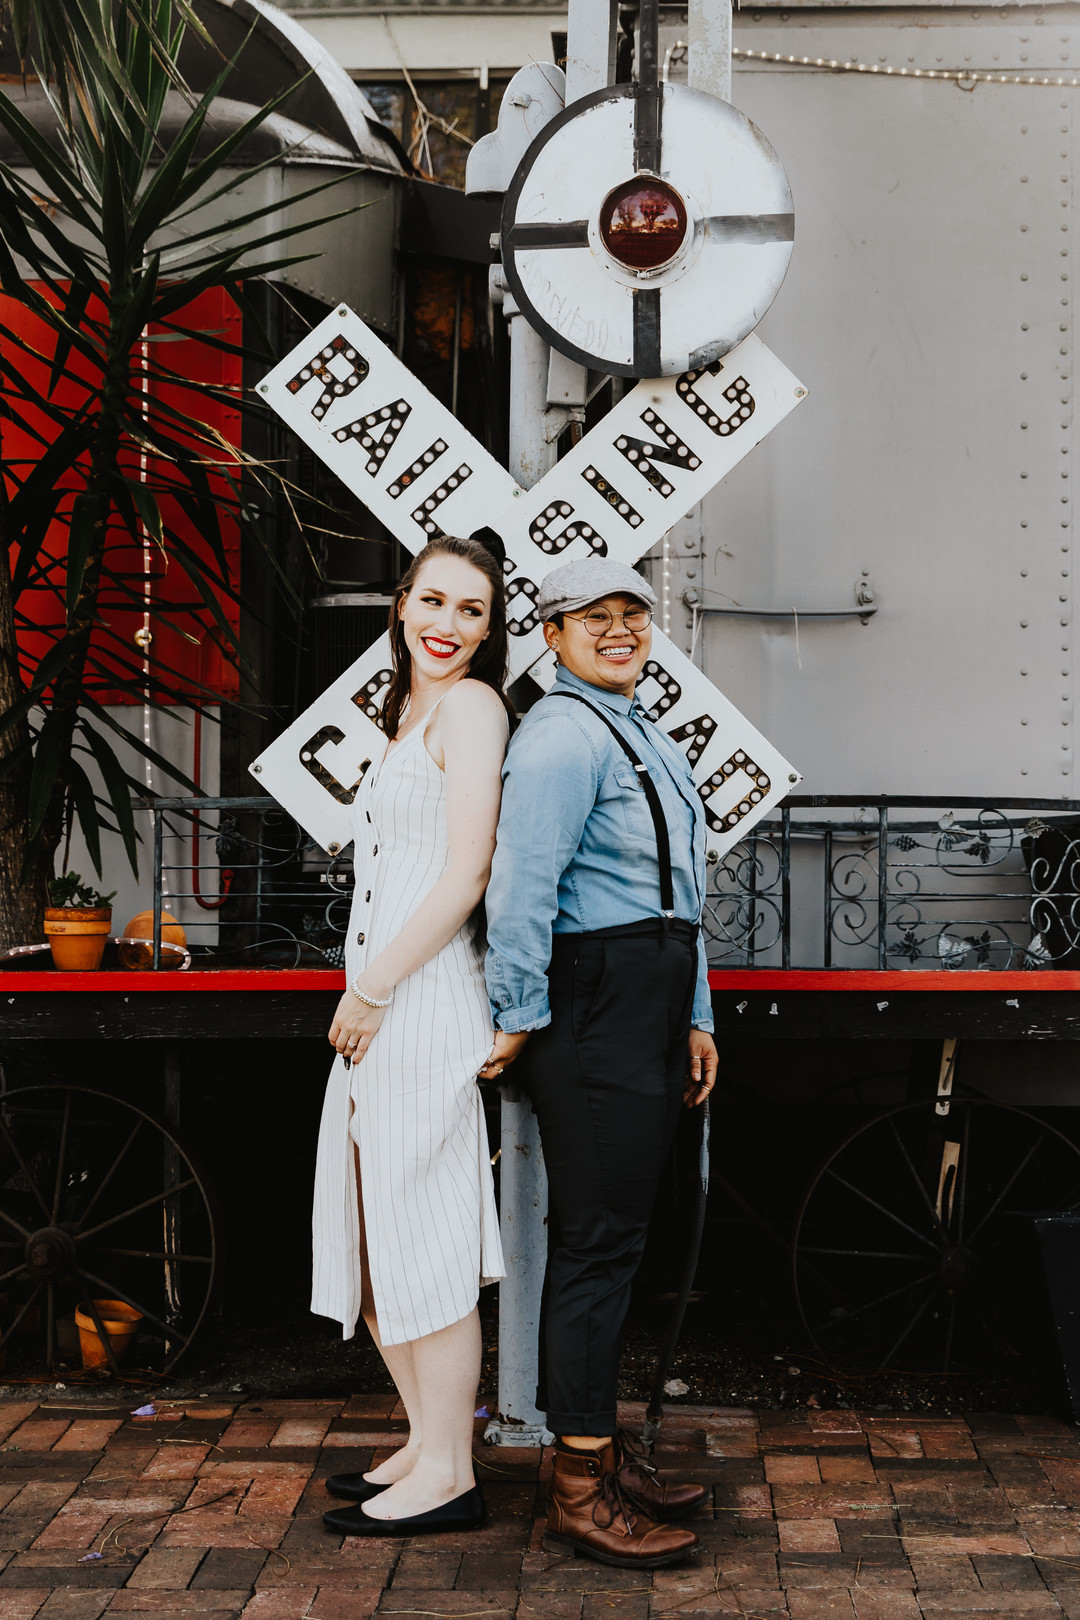 Engagement photos in the historic Los Rios district in California engaged two brides striped dress suspenders boots cuddling railroad